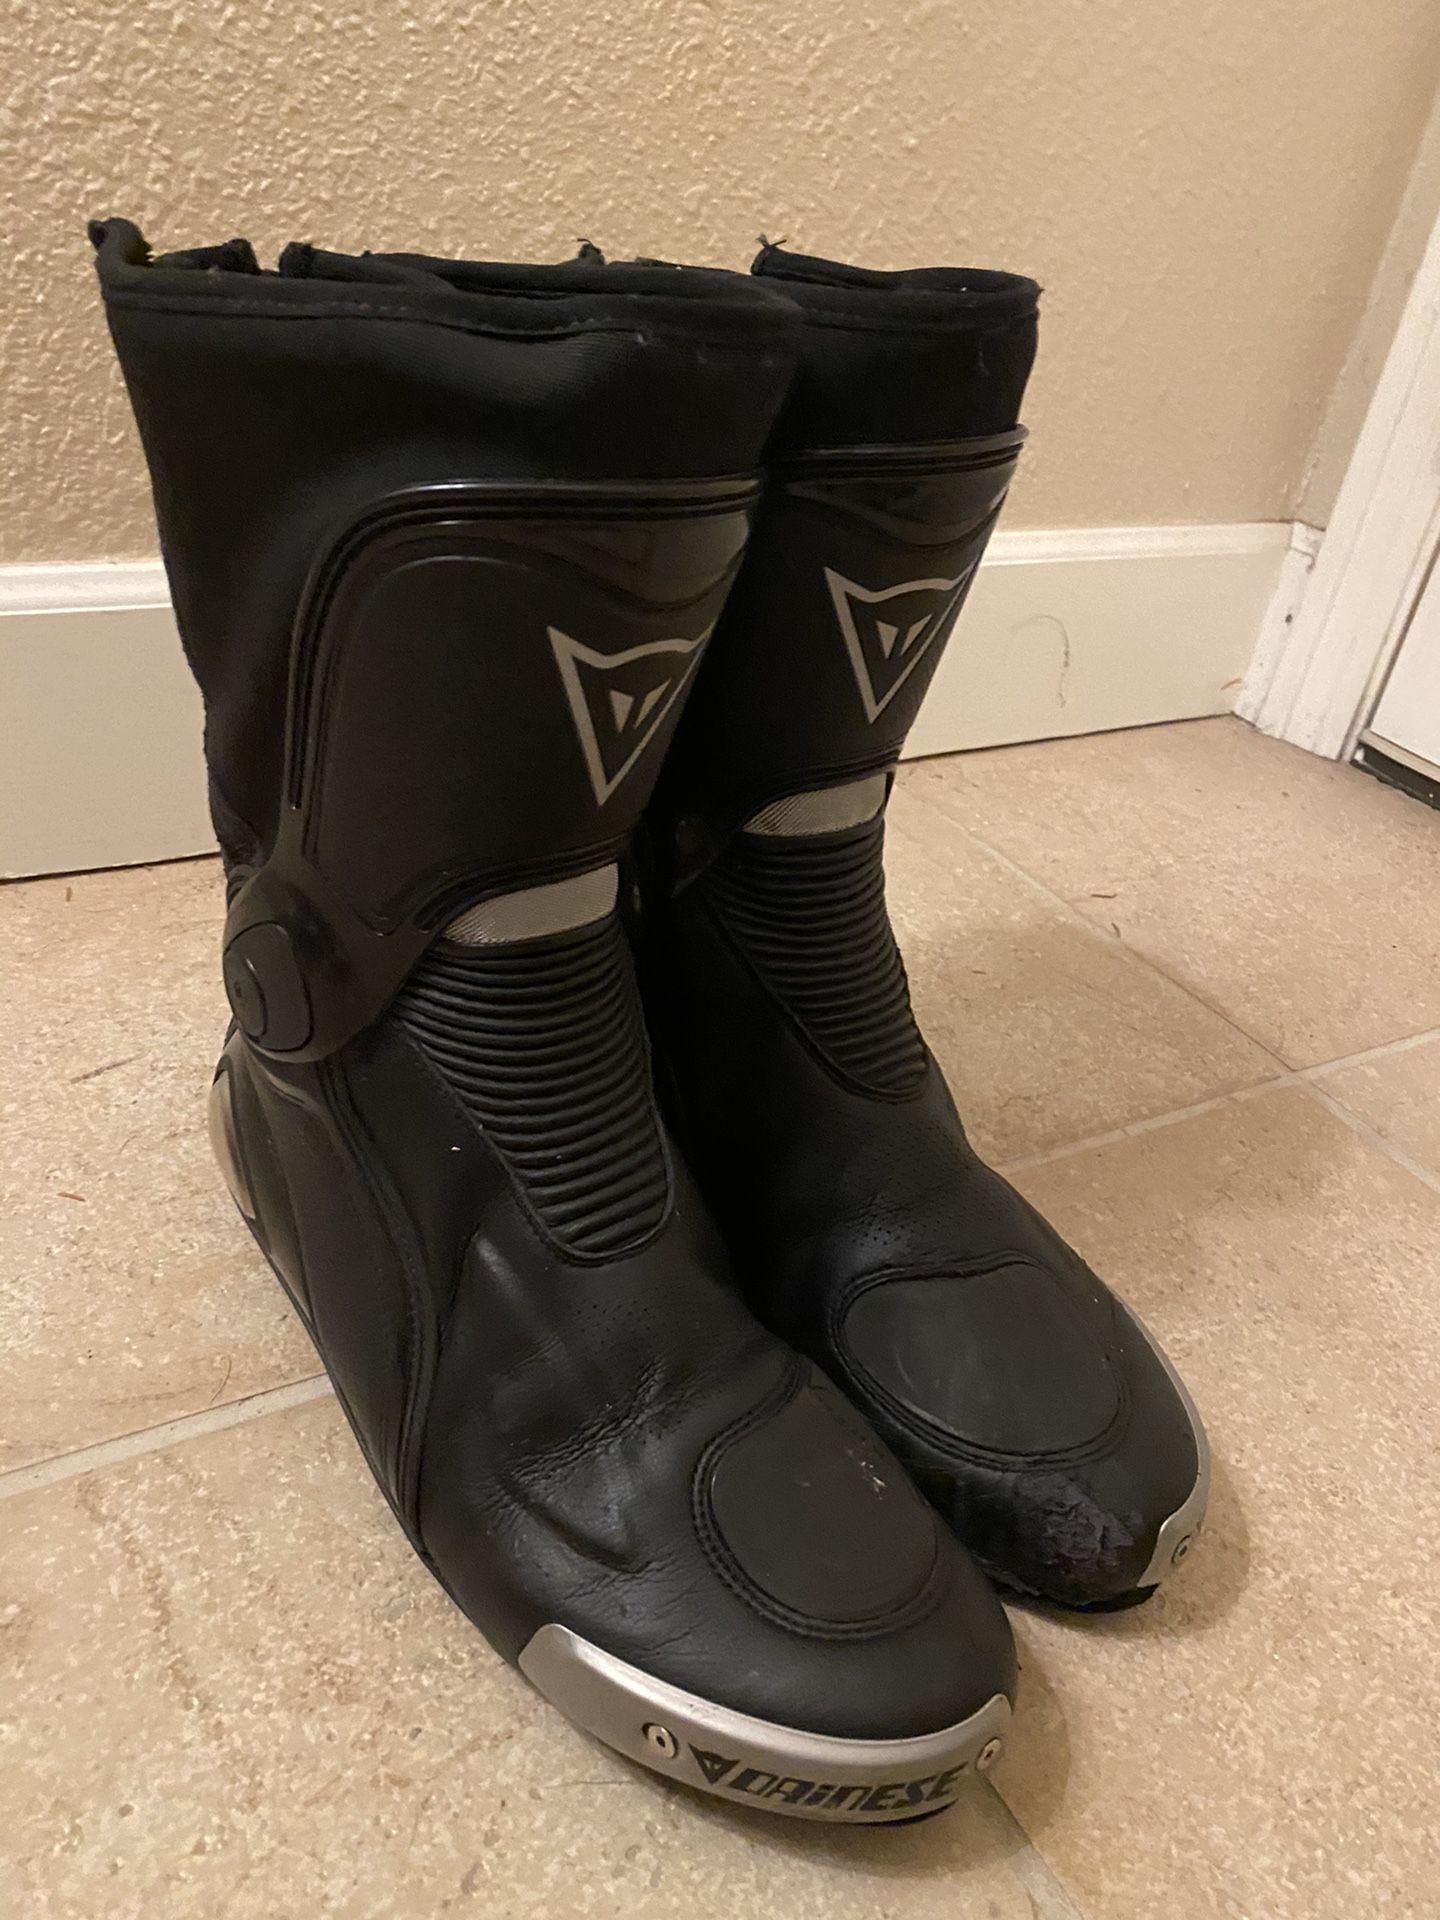 Dainese motorcycle boots needs repair size 11.5 US